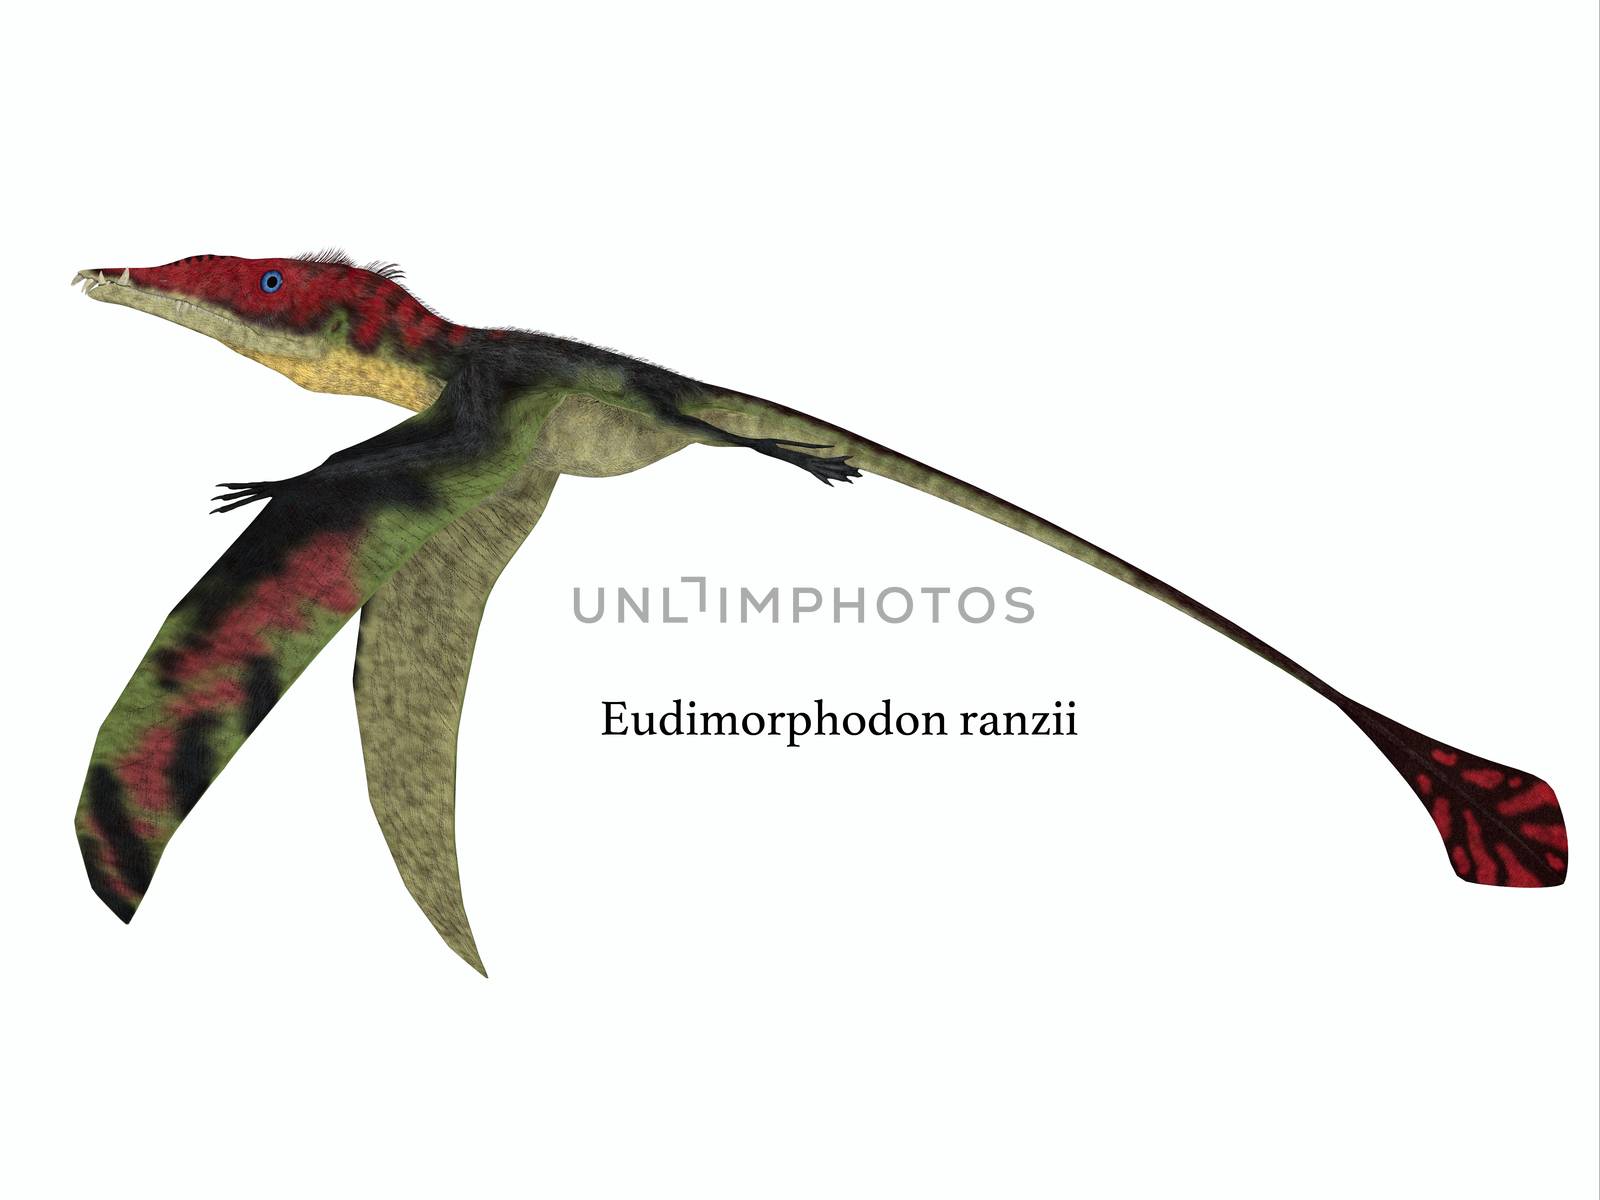 The carnivorous Eadimorphodon was a pterosaur flying reptile that lived in Italy in the Triassic Period.